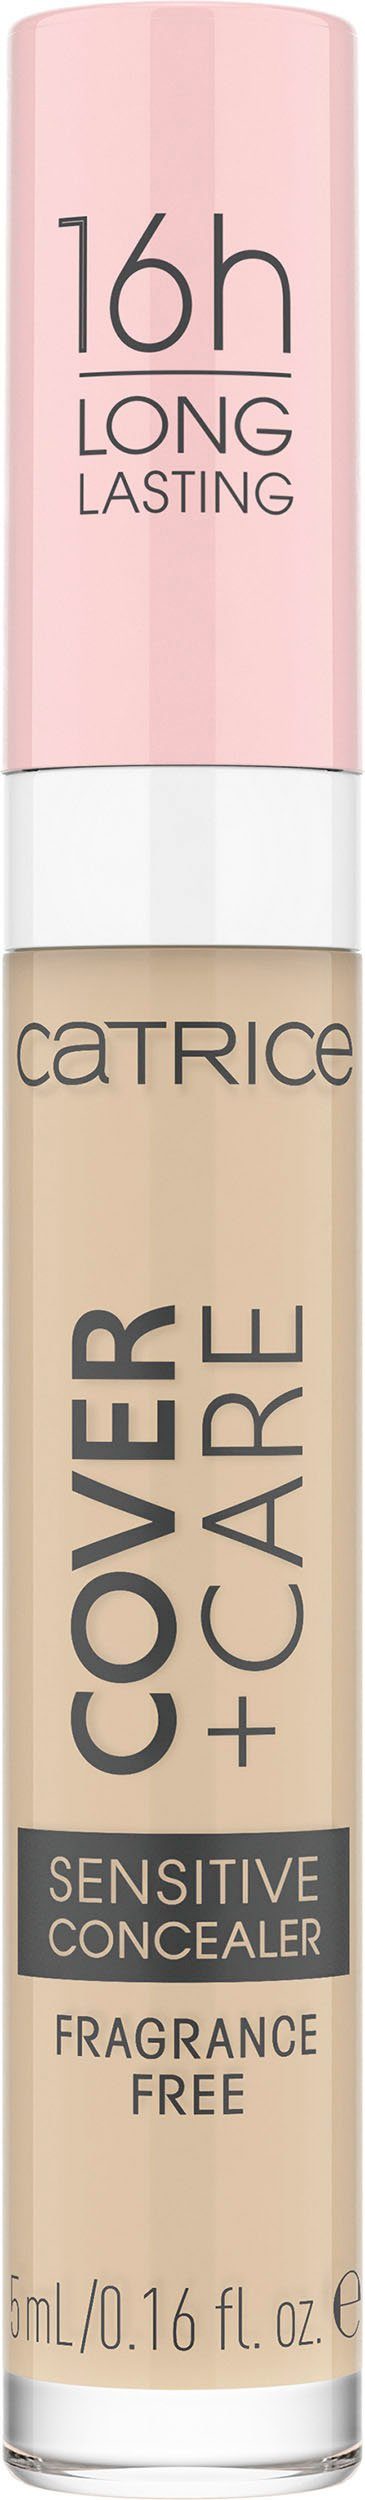 Sensitive Catrice Care 3-tlg. + nude Concealer Concealer, Cover 010C Catrice